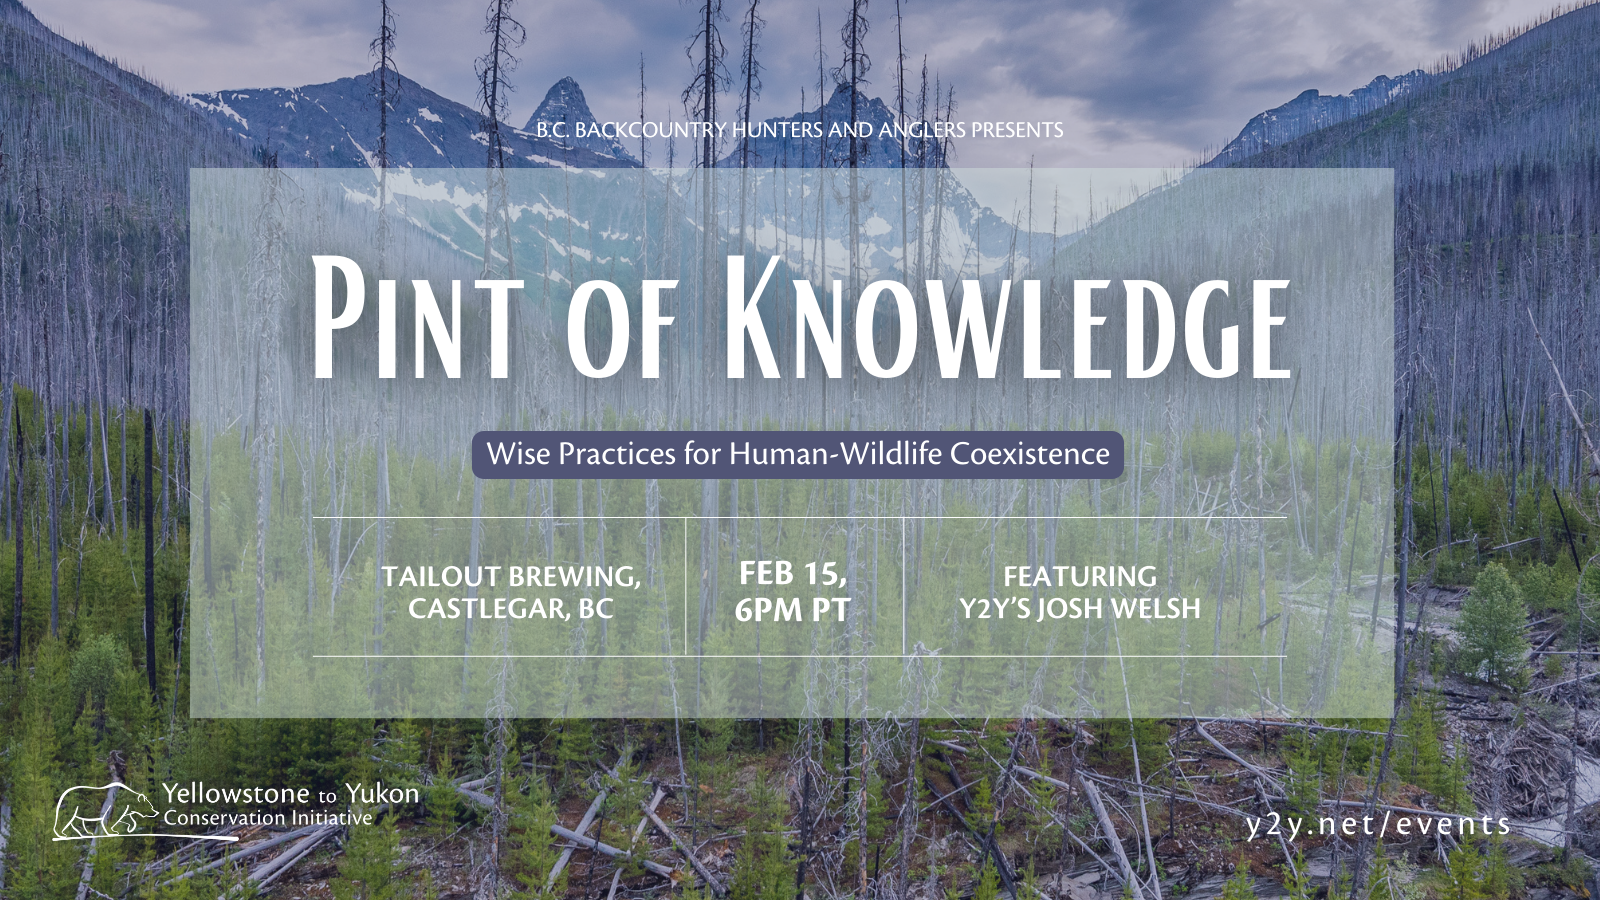 An event poster describing the 'Pint of Knowledge' event presented by B.C. Backcountry Hunters and Anglers, happening on Feb. 15 at 6PM PT. The event is taking place is Castlegar, B.C. and features Y2Y's Josh Welsh